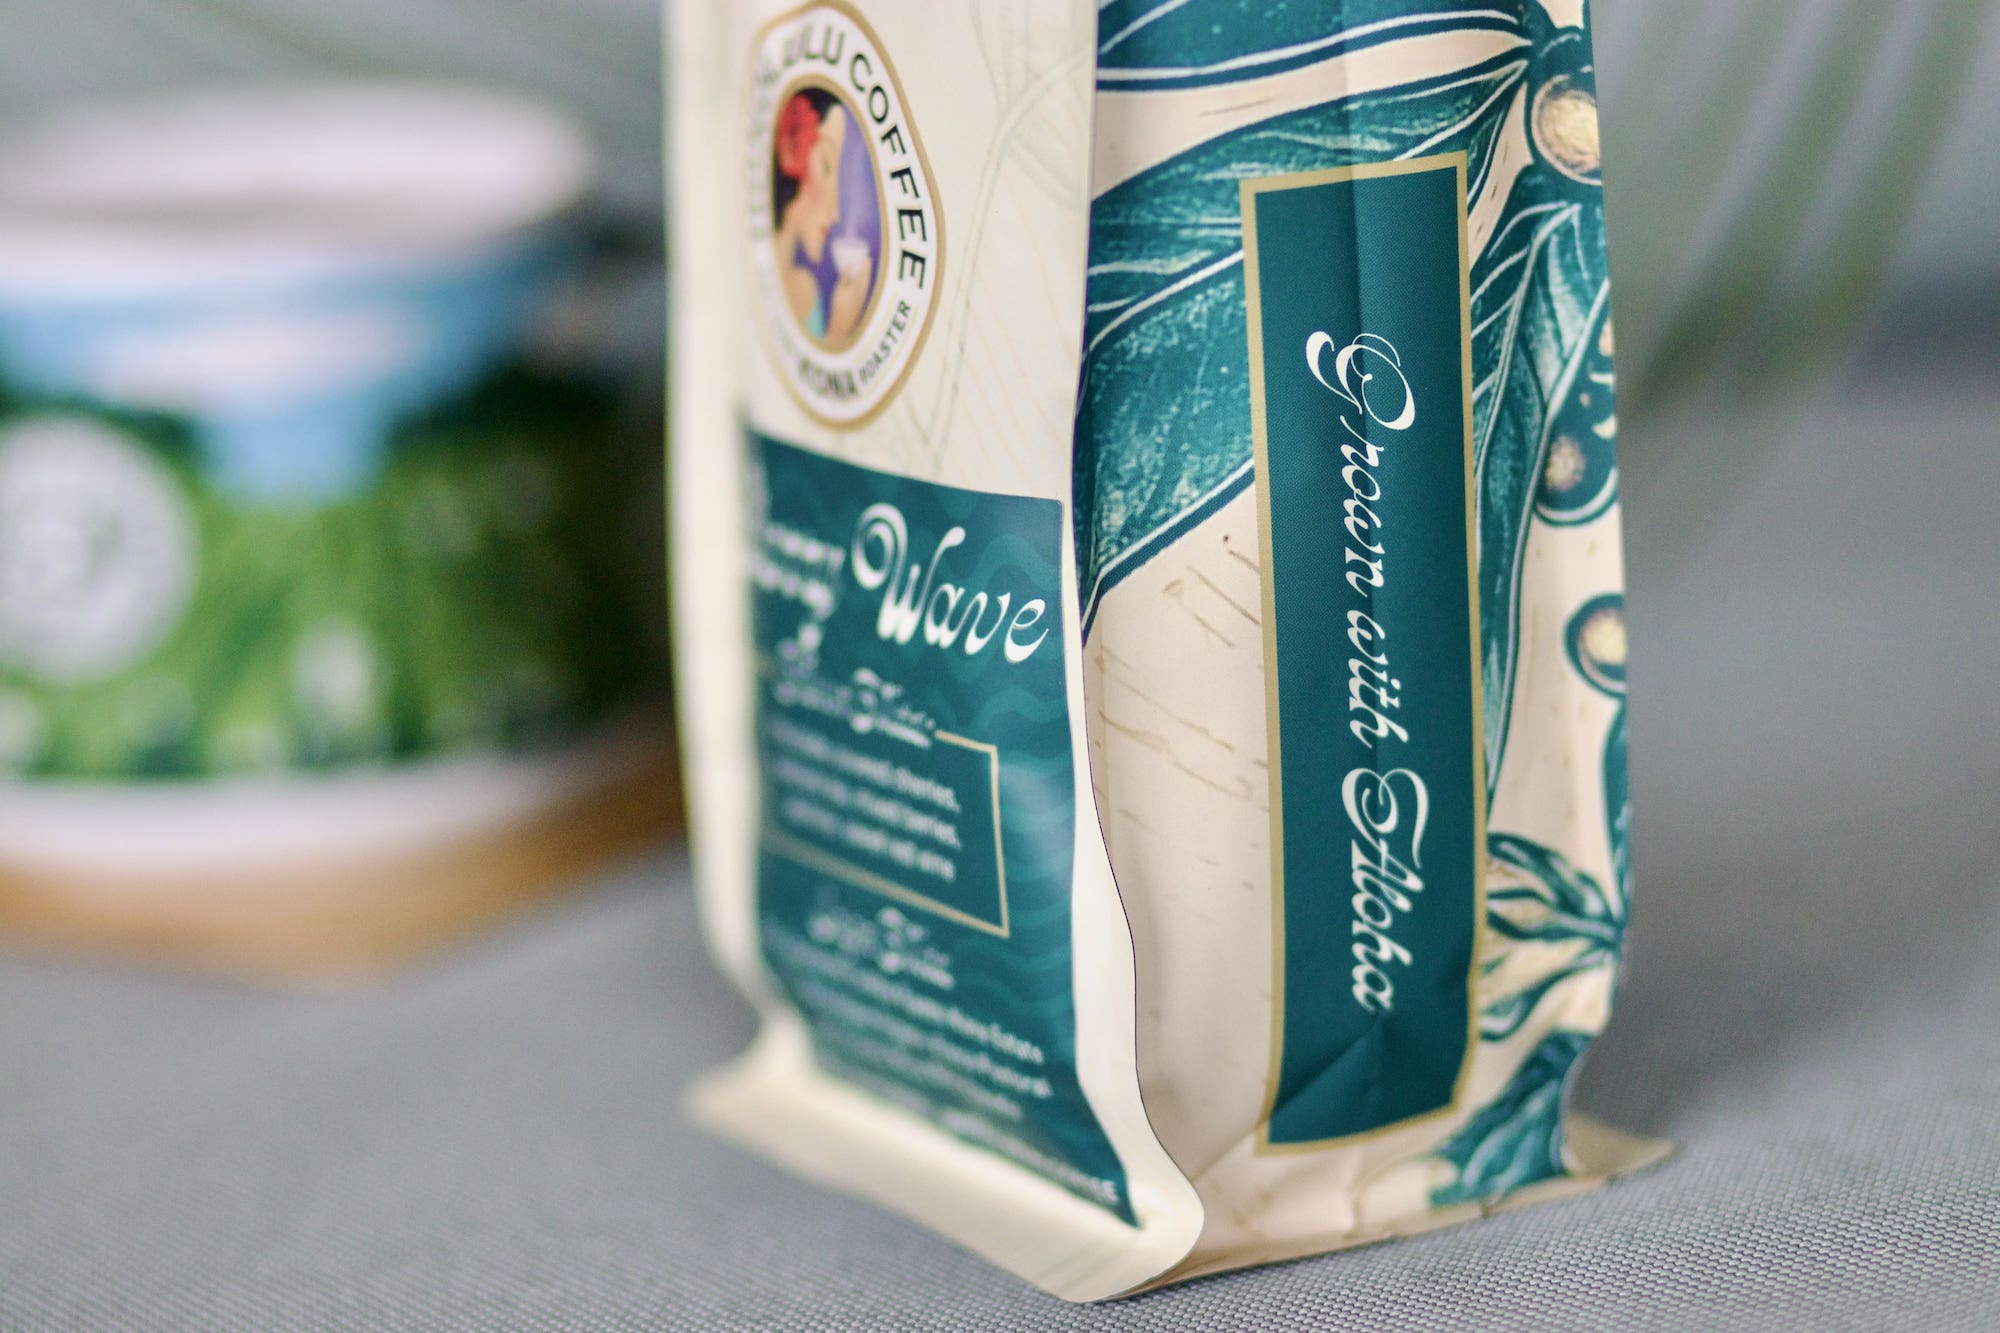 The side view of the new Cherry Wave coffee blend bag with the text "Grown with Aloha"